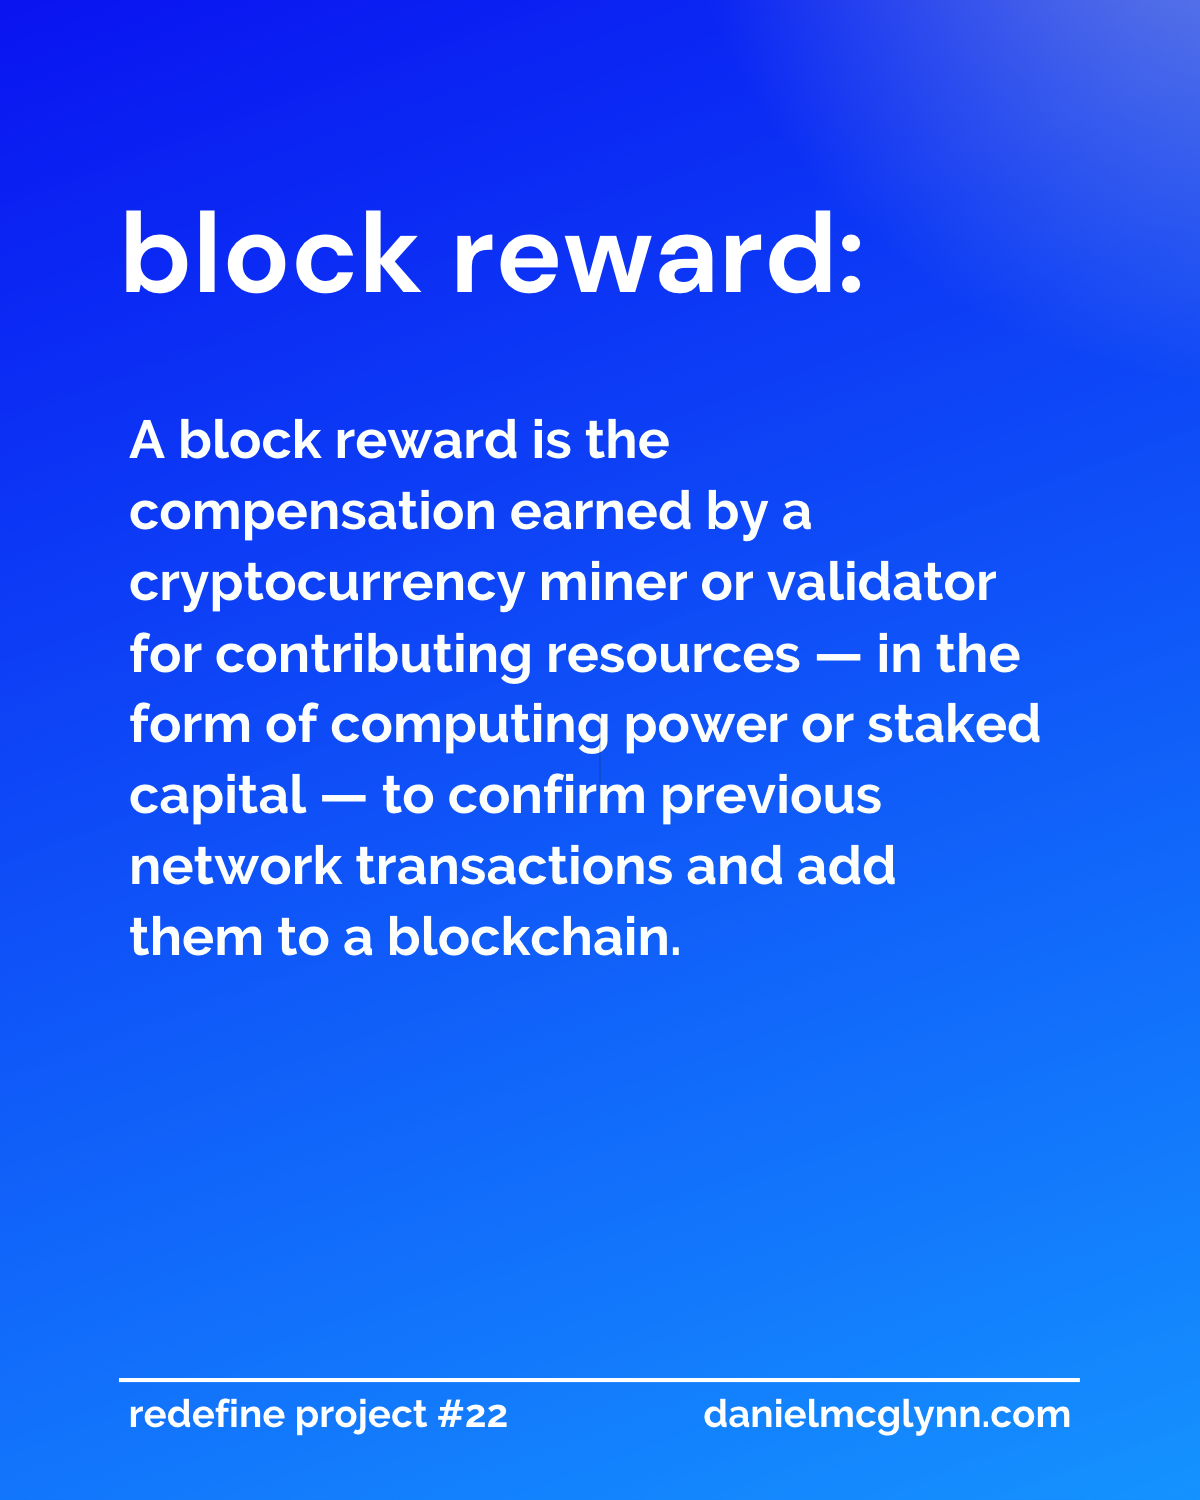 A block reward is the compensation earned by a cryptocurrency miner or validator for contributing resources toward the upkeep of the network.